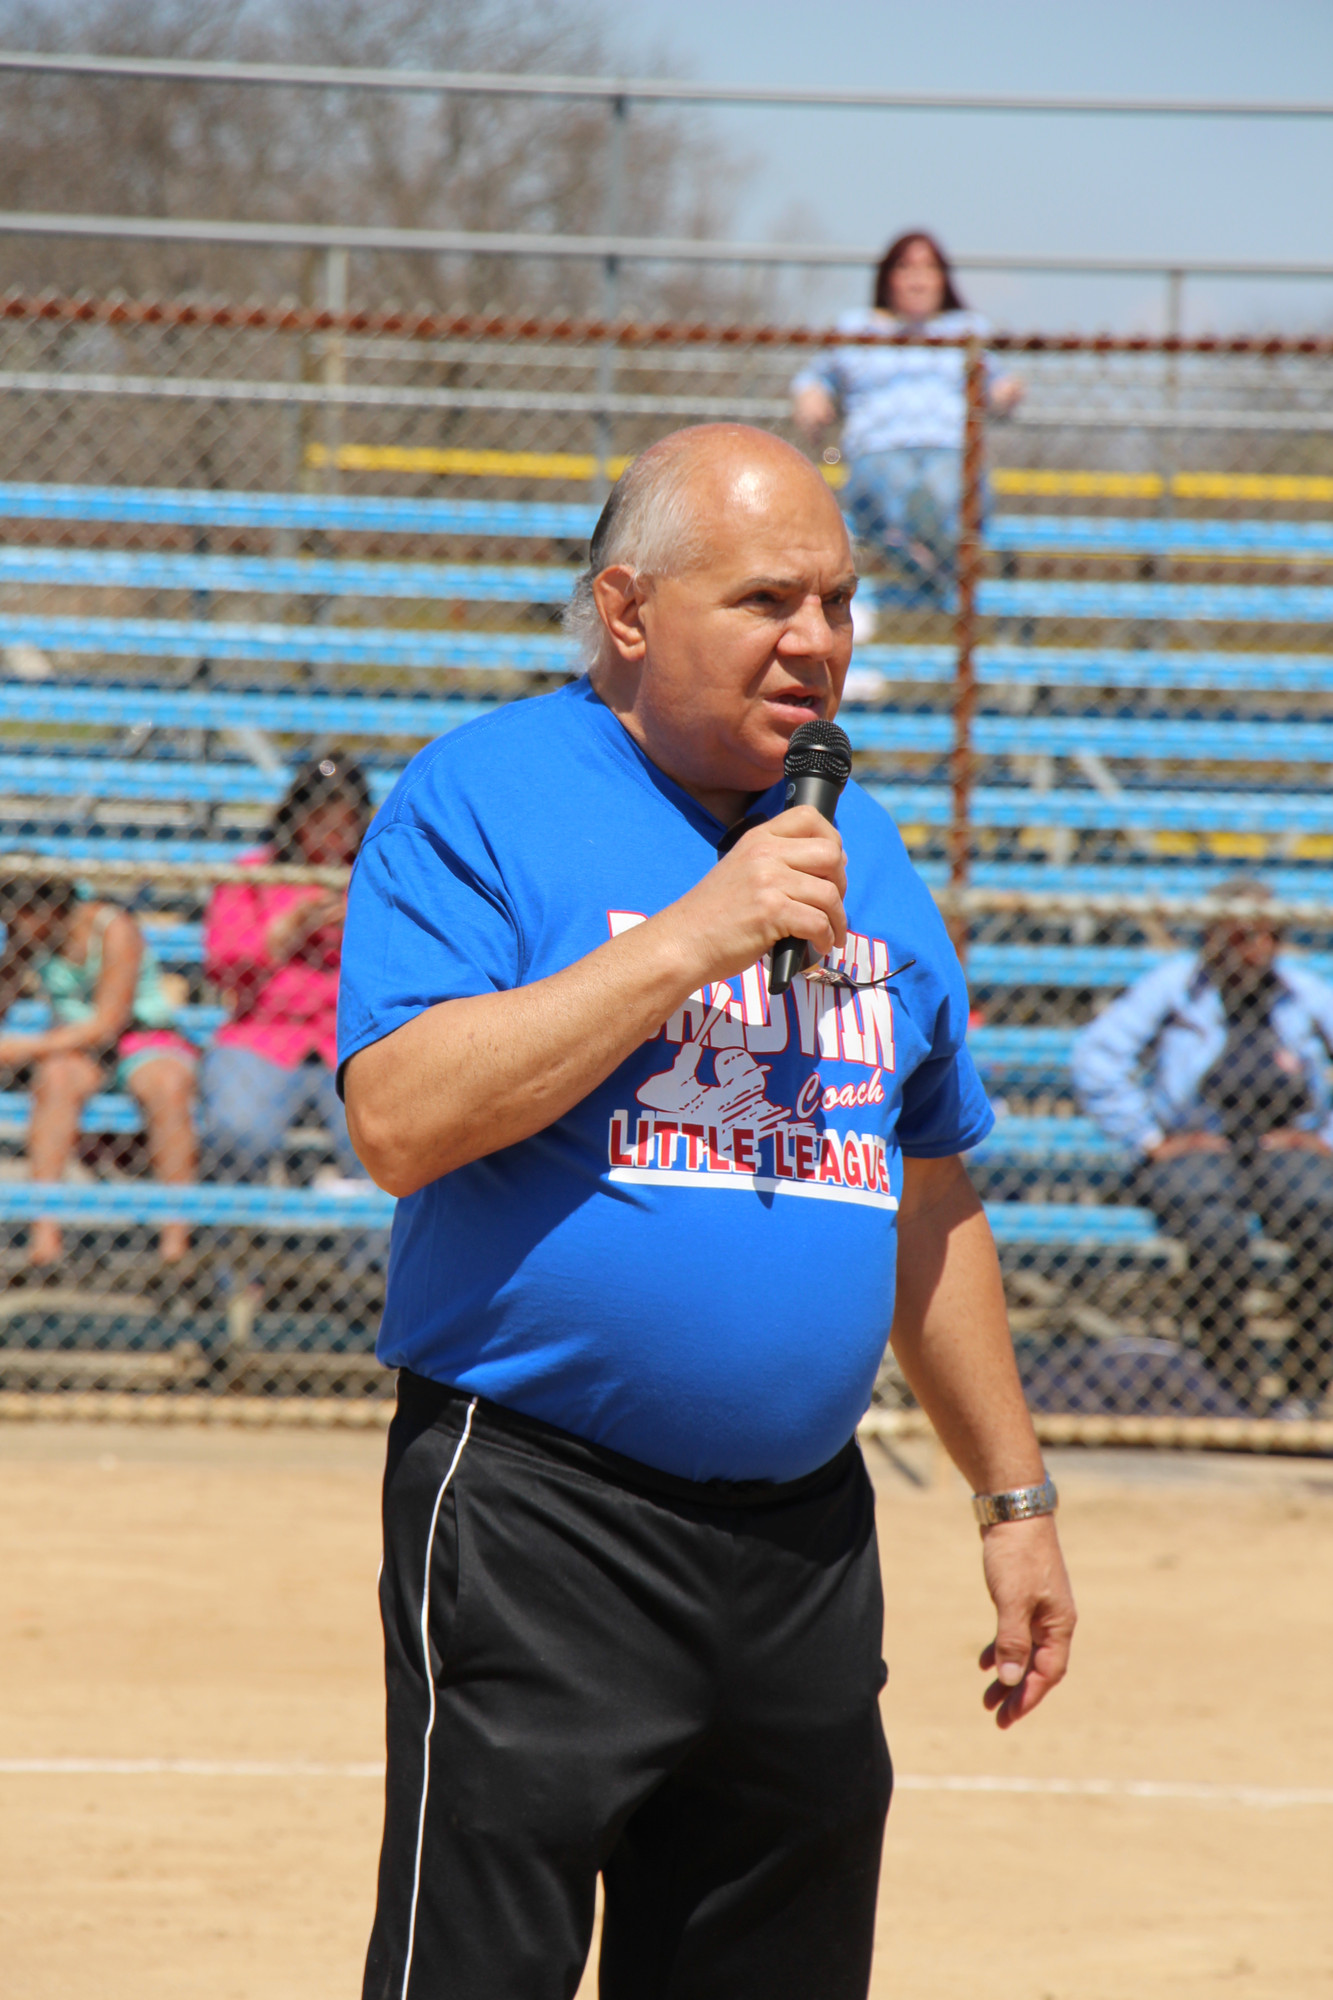 Dee Cruz, head of the Baldwin Little League opened up the ceremonies with an introduction of the many teams to Baldwin Park. He also welcomes the locally-elected officials in attendance.